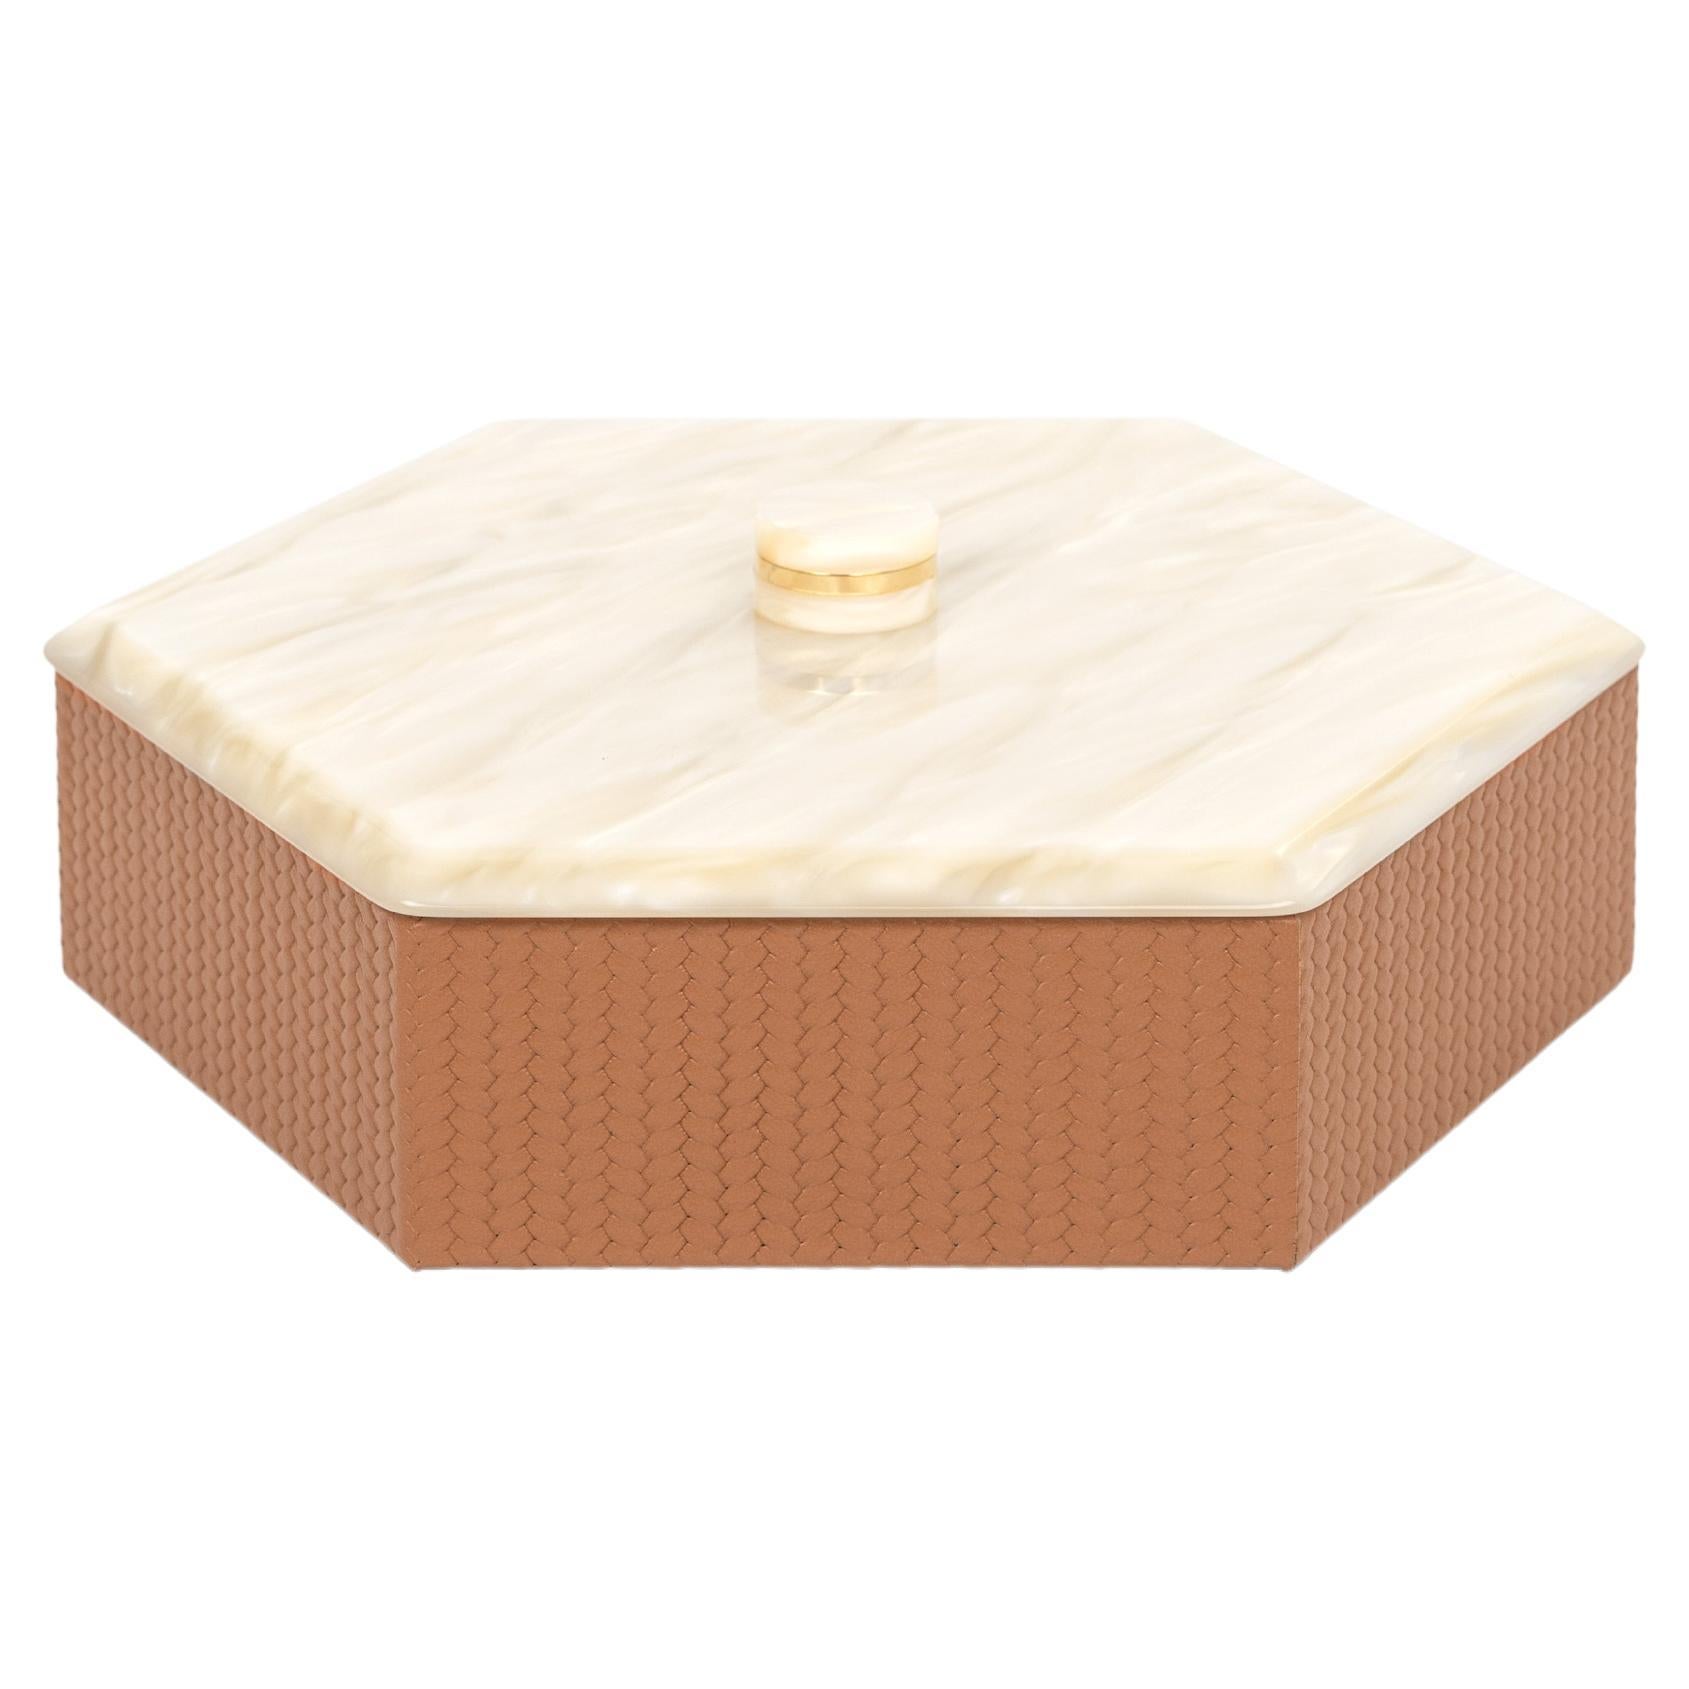 21st Century Kelly Decorative Hexagonal Box in Leather Handcrafed in Italy